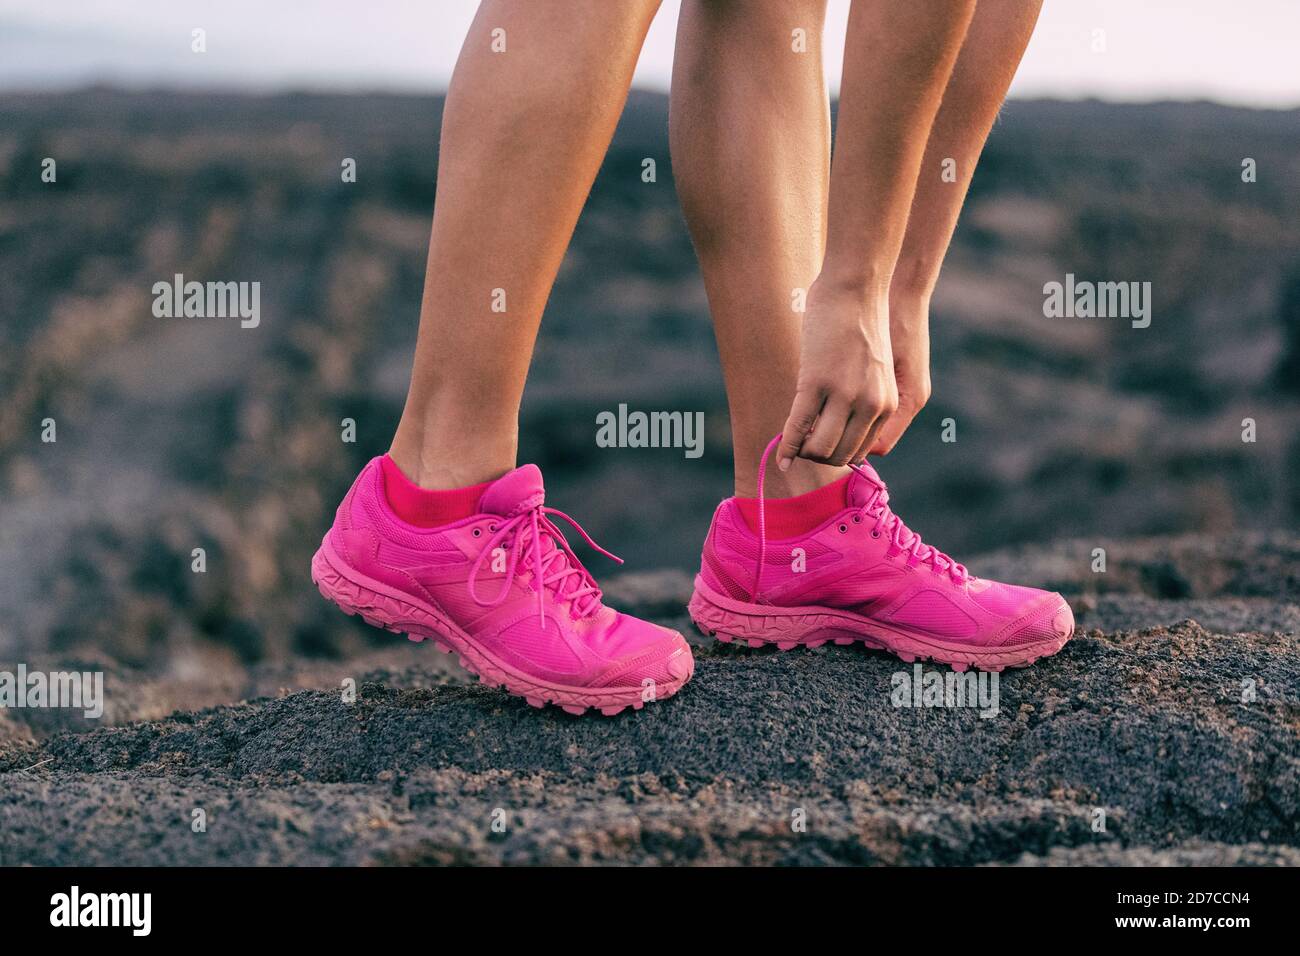 bright pink running shoes